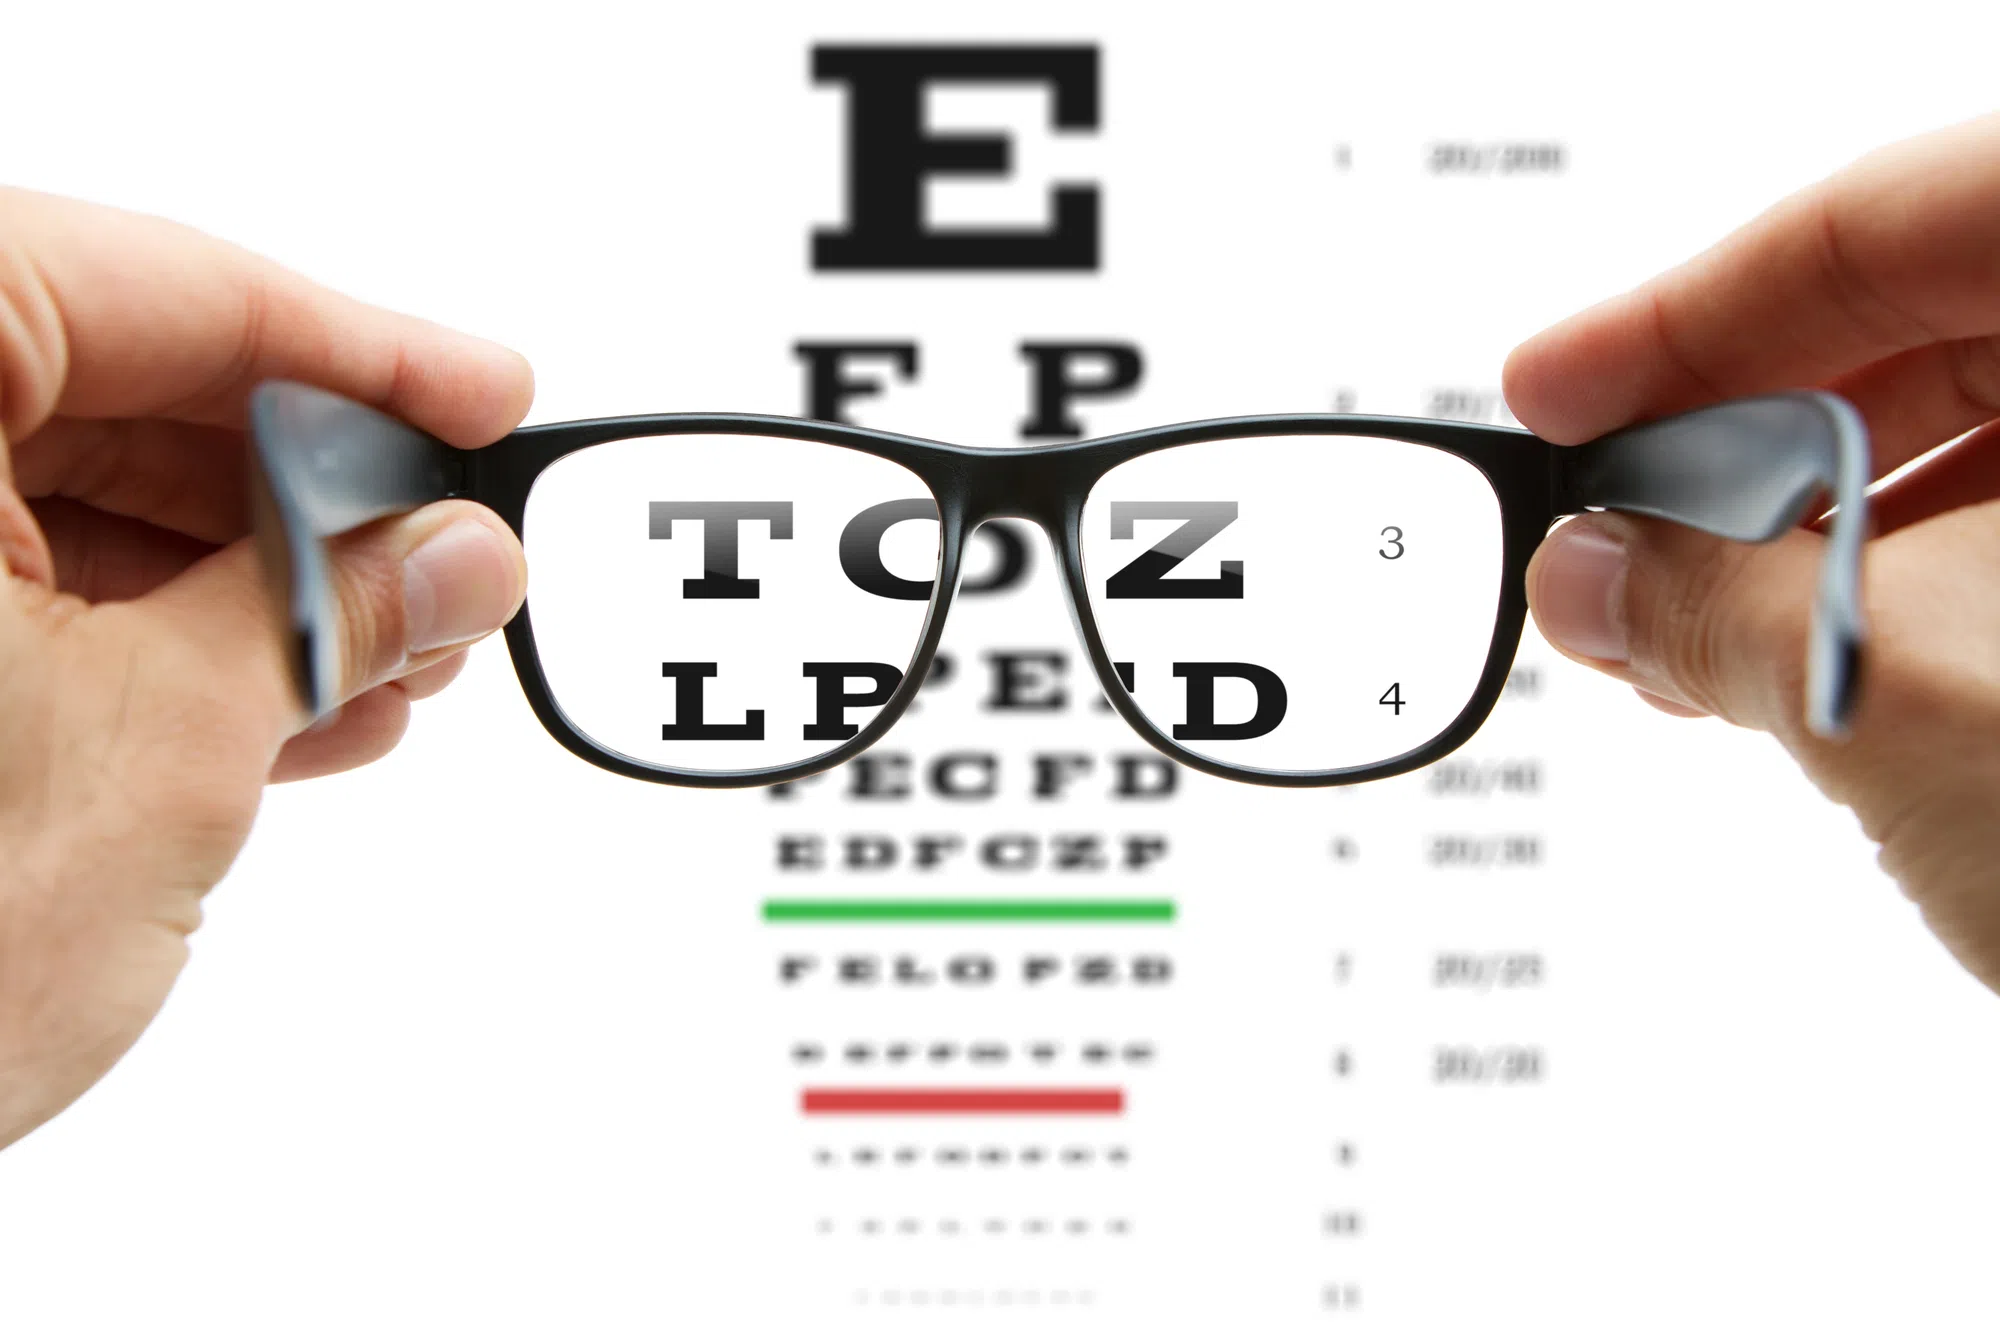 STUDY: Nearsightedness Reaching Epidemic Levels as Half the World Will Need Glasses by 2050